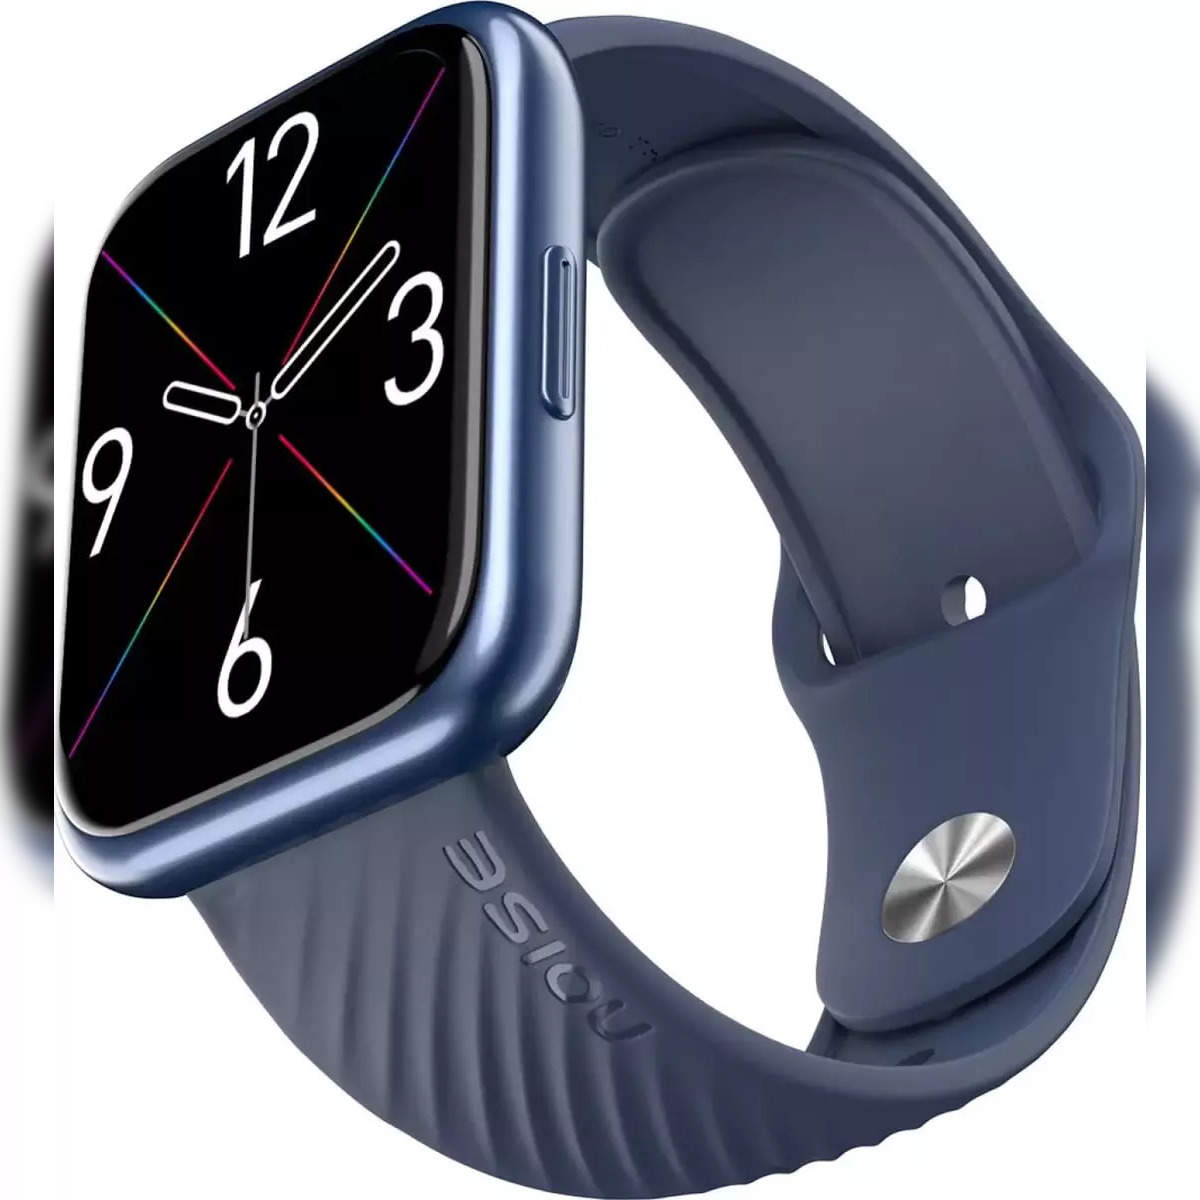 Apple Watch Data Reveals One in Three Americans Exposed to Excessive Noise  | Headphonesty